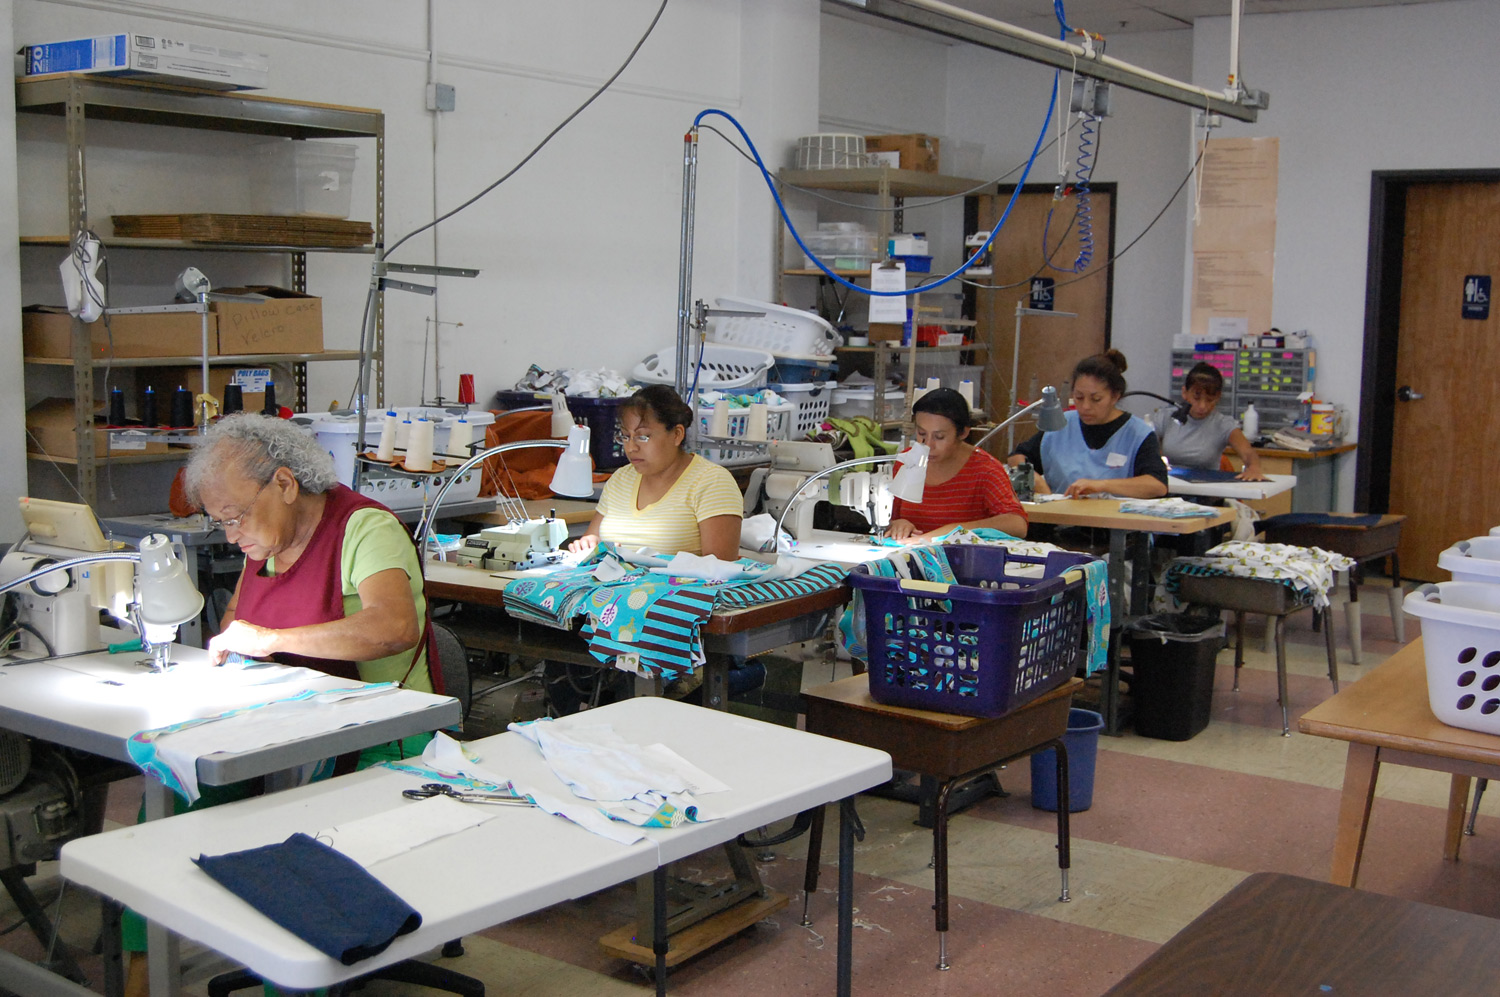 Southwest Creations: US Based Contract Manufacturing Factory